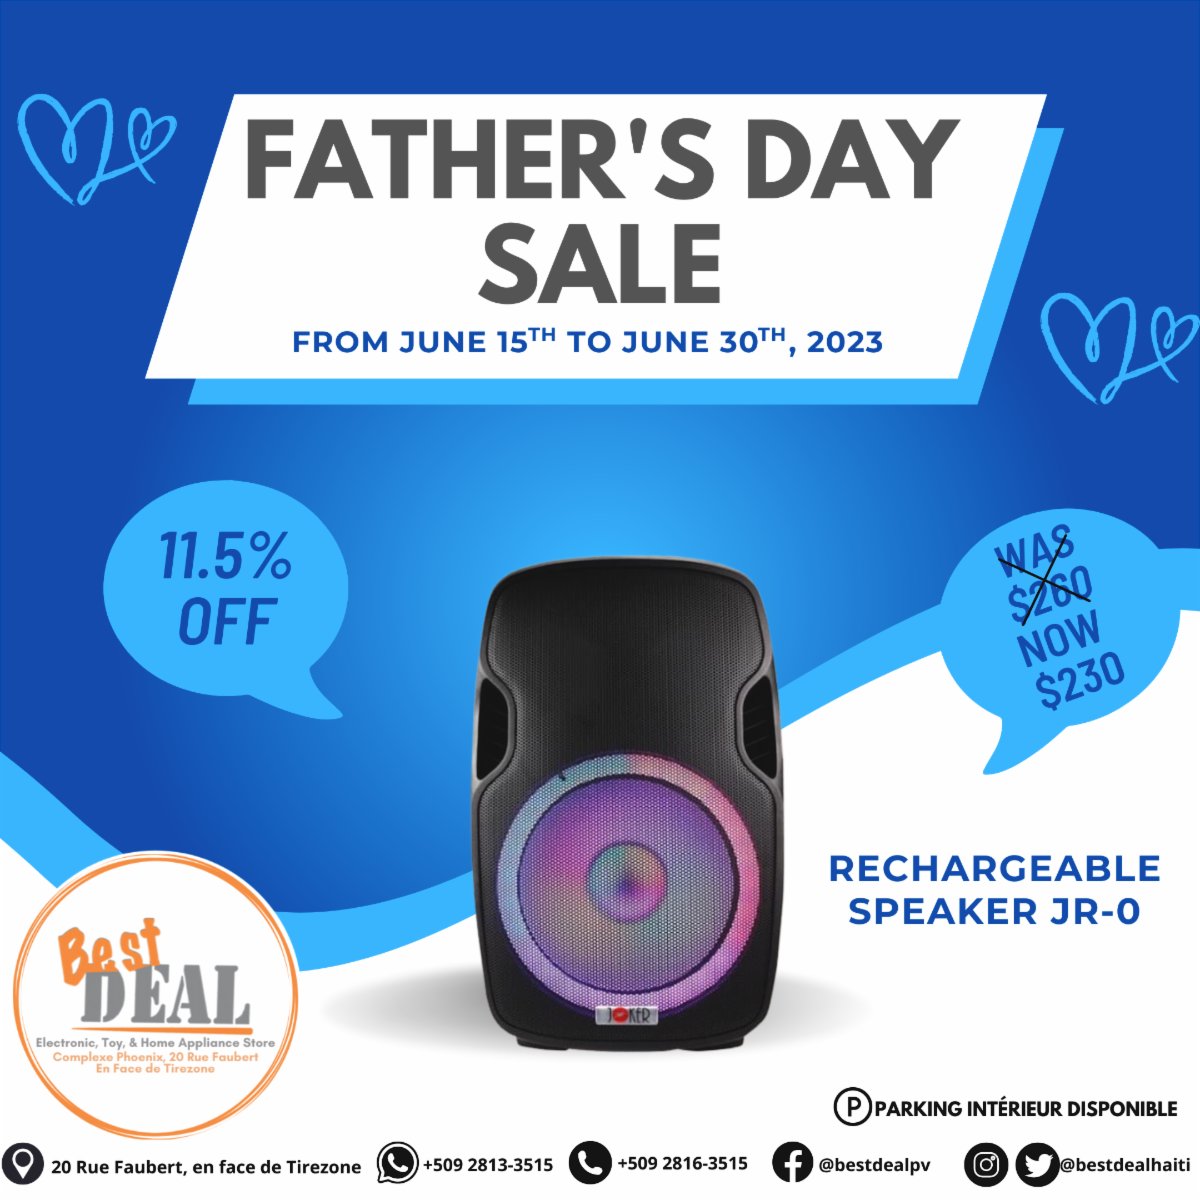 What Dad Wants, Dad Gets💙

#FatherGiftIdeas #DadDay #fetedesperes #papa #bonnefetepapa #fetedespapas #homme #cadeau #cadeaupapa #cadeaufetedesperes #ideecadeau #speaker #rechargeablespeaker #rechargeable #Joker #sale #piyay #special